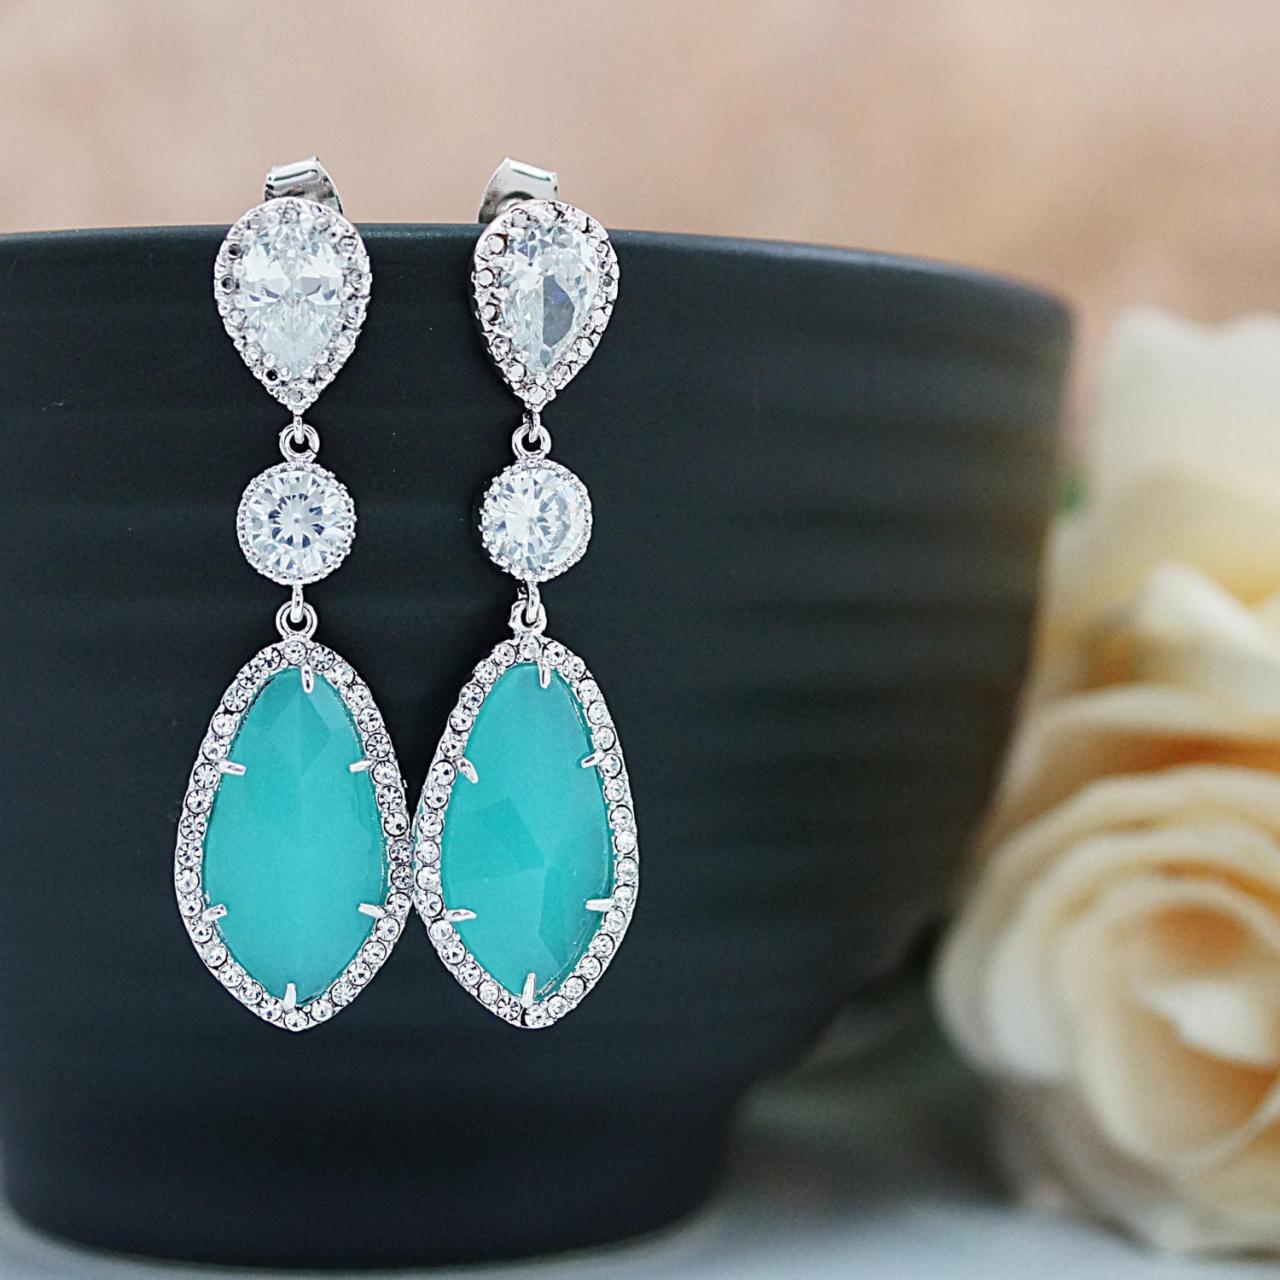 Wedding Jewelry Bridesmaids Gift Bridal Earrings Bridesmaid Earrings Dangle Earrings Lux Mint Opal With Cubic Zirconia Drop Earrings